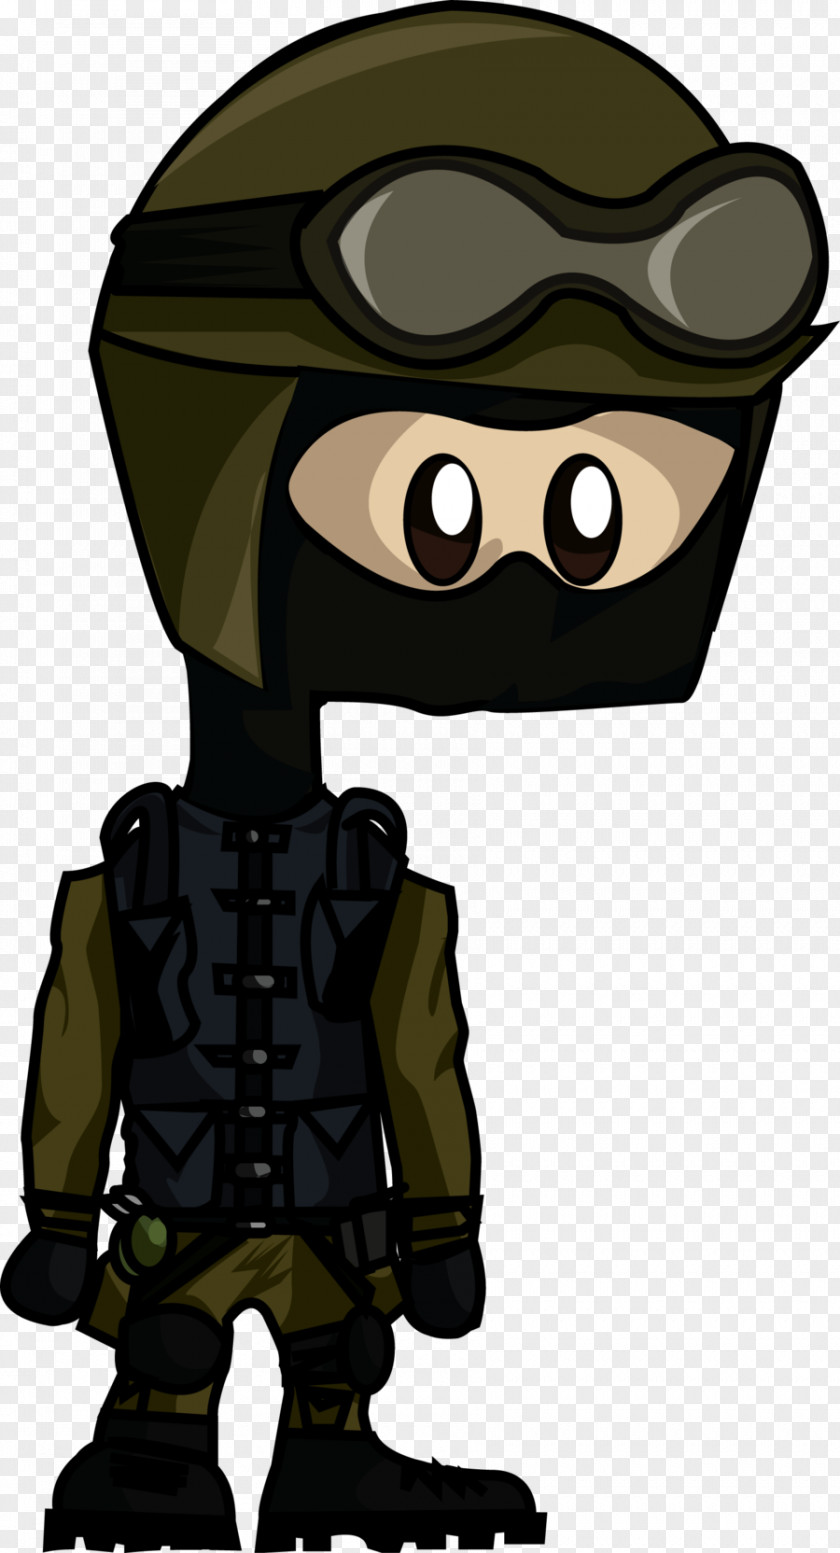 COUNTER Counter-Strike: Global Offensive Cartoon Drawing PNG